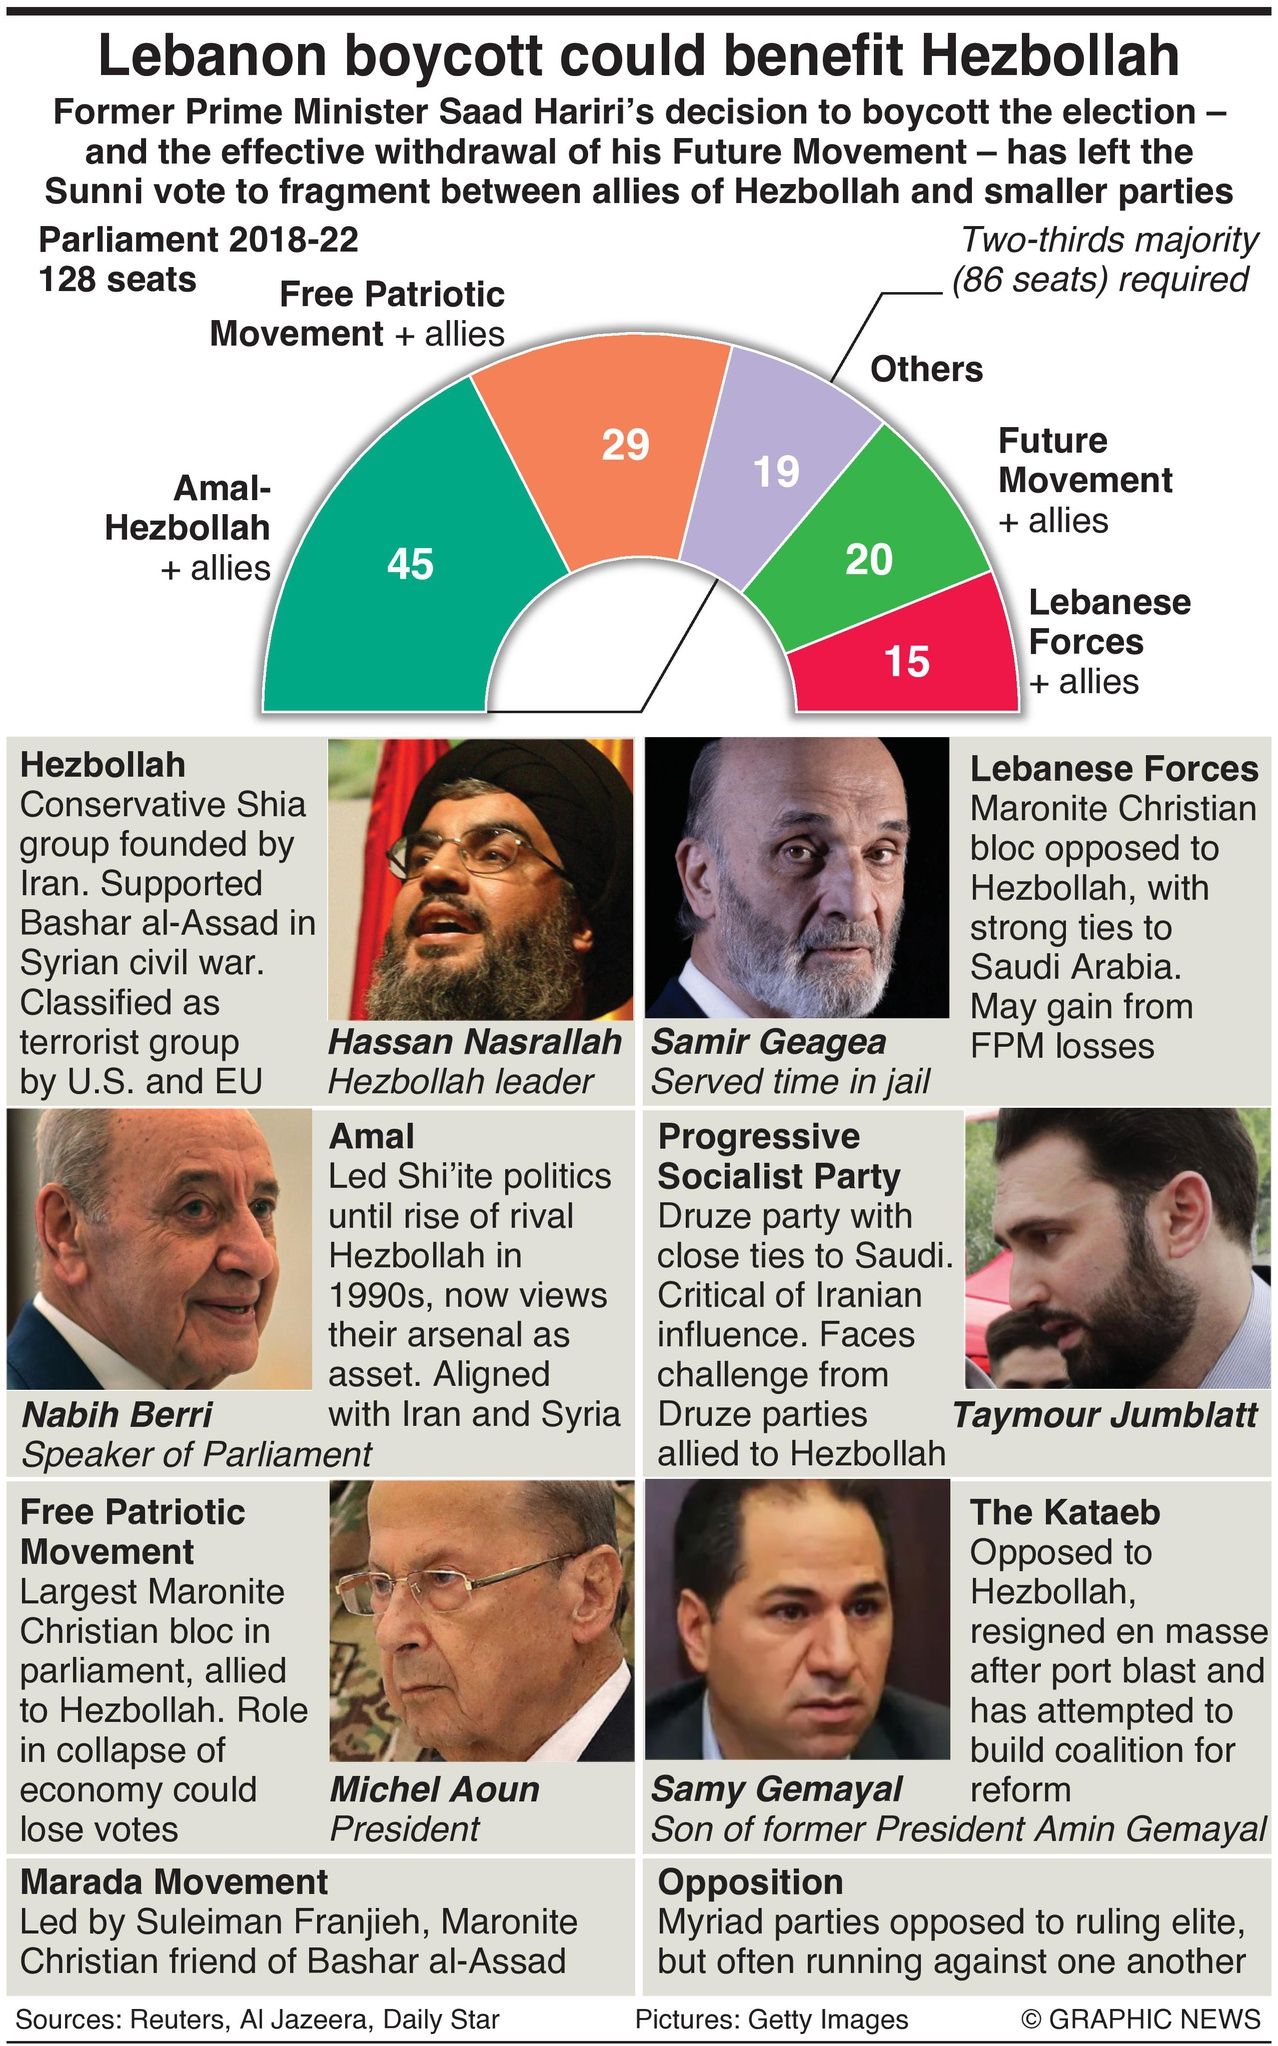 Breakdown of the main parties in Lebanon's Parlimentary elections, 2022